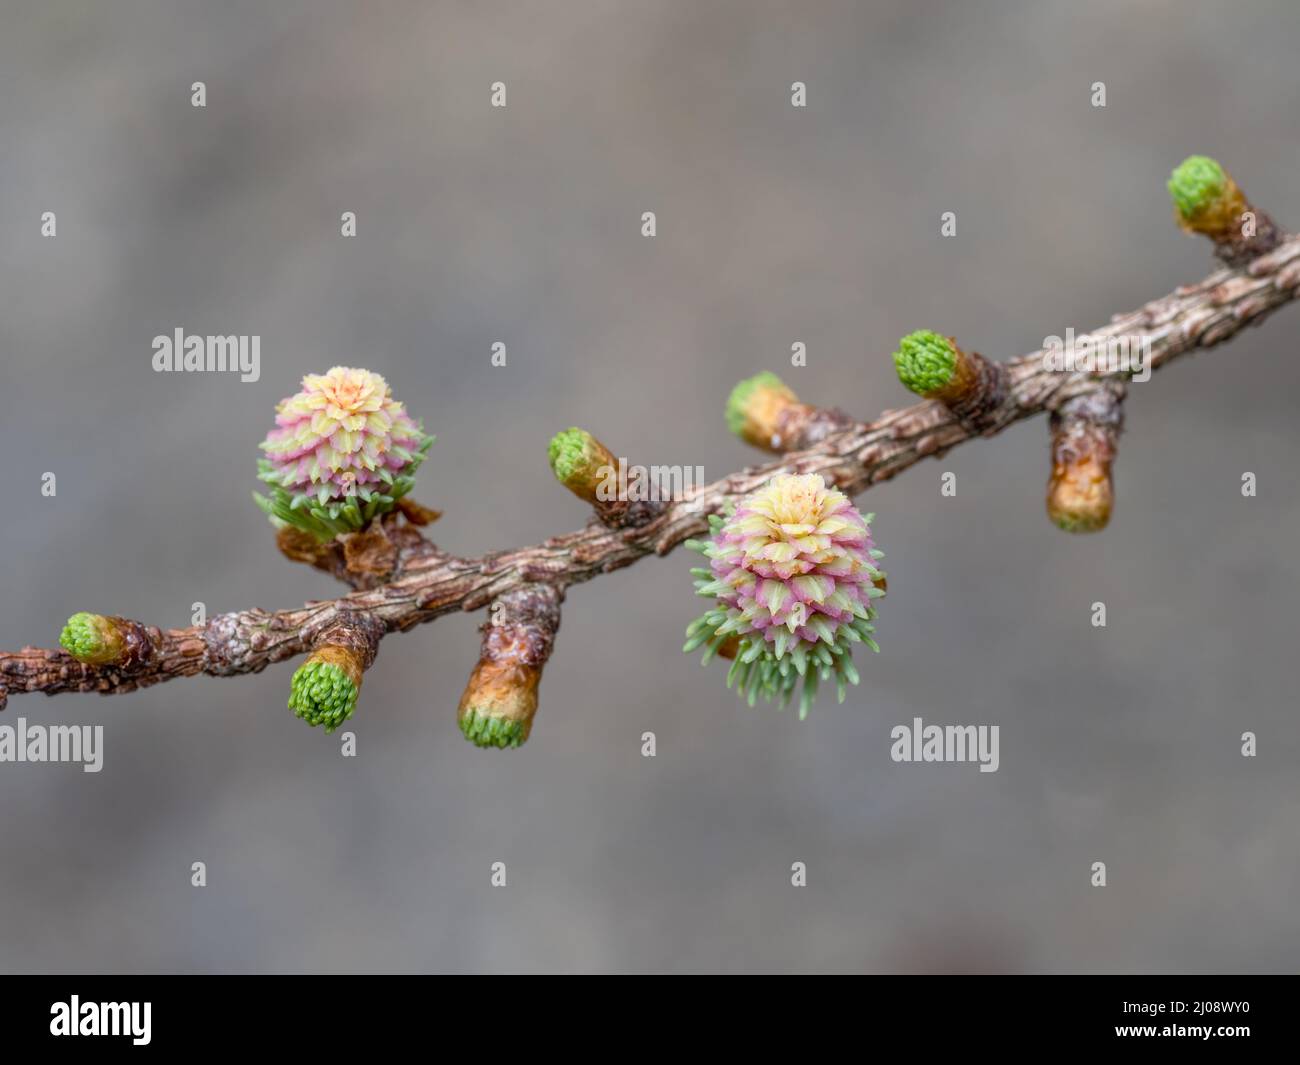 Tiny, baby pine cones - female flowers of the larch tree. Stock Photo